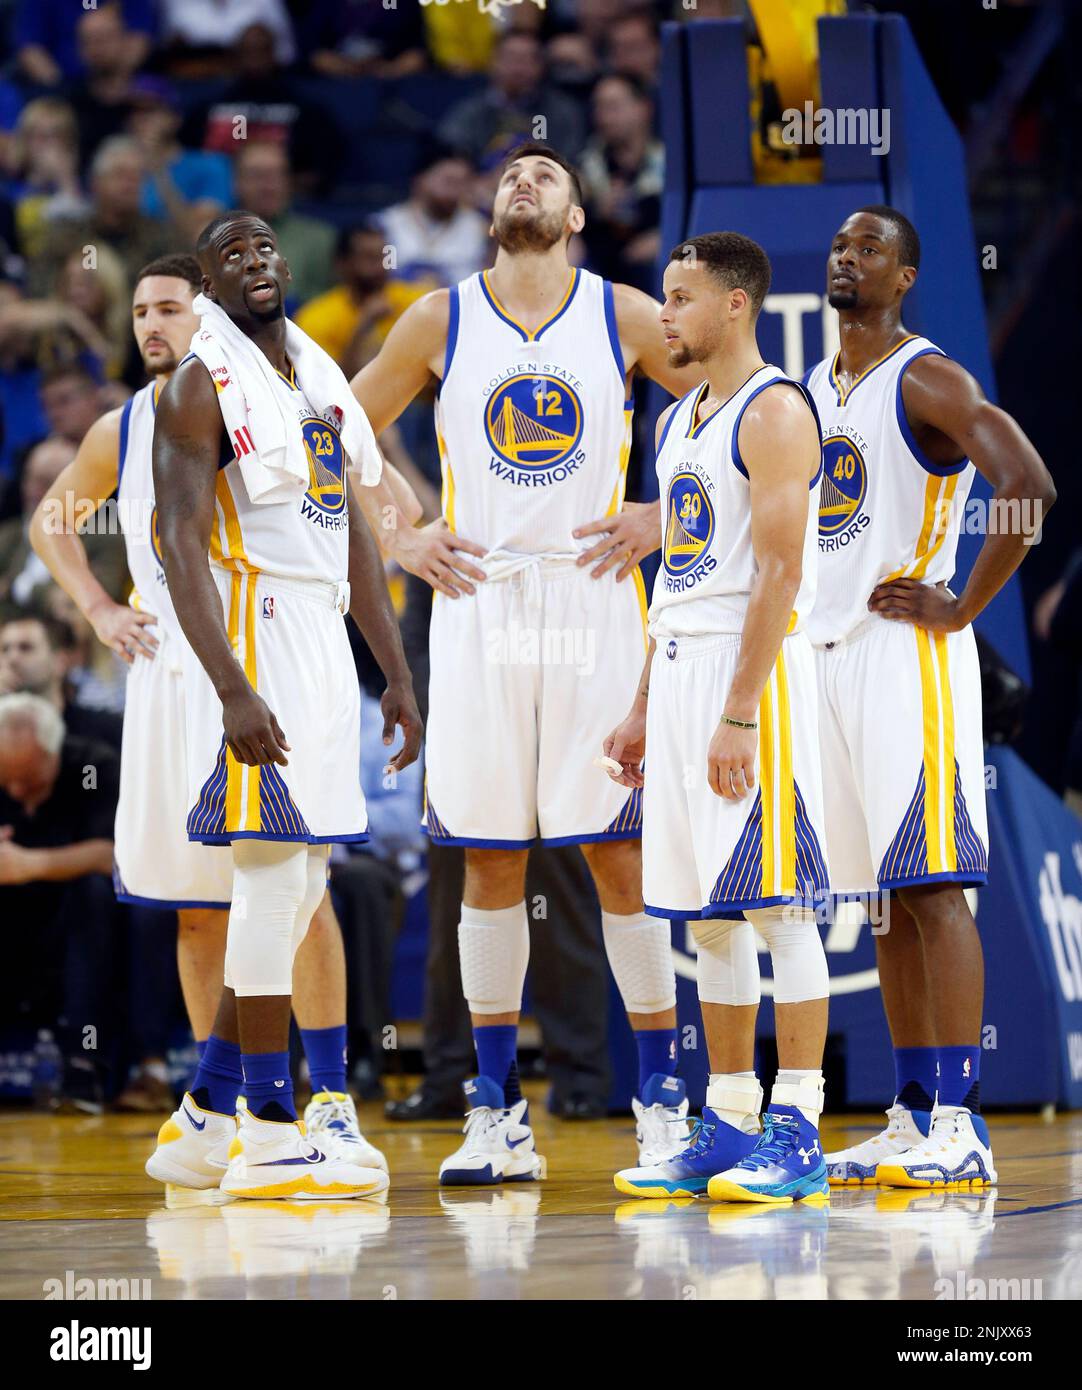 Golden State Warriors Klay Thompson, Draymond Green, Andrew Bogut, Stephen Curry and Harrison Barnes wait out a video replay during Warriors 115-94 win over Utah Jazz during NBA game at Oracle Arena